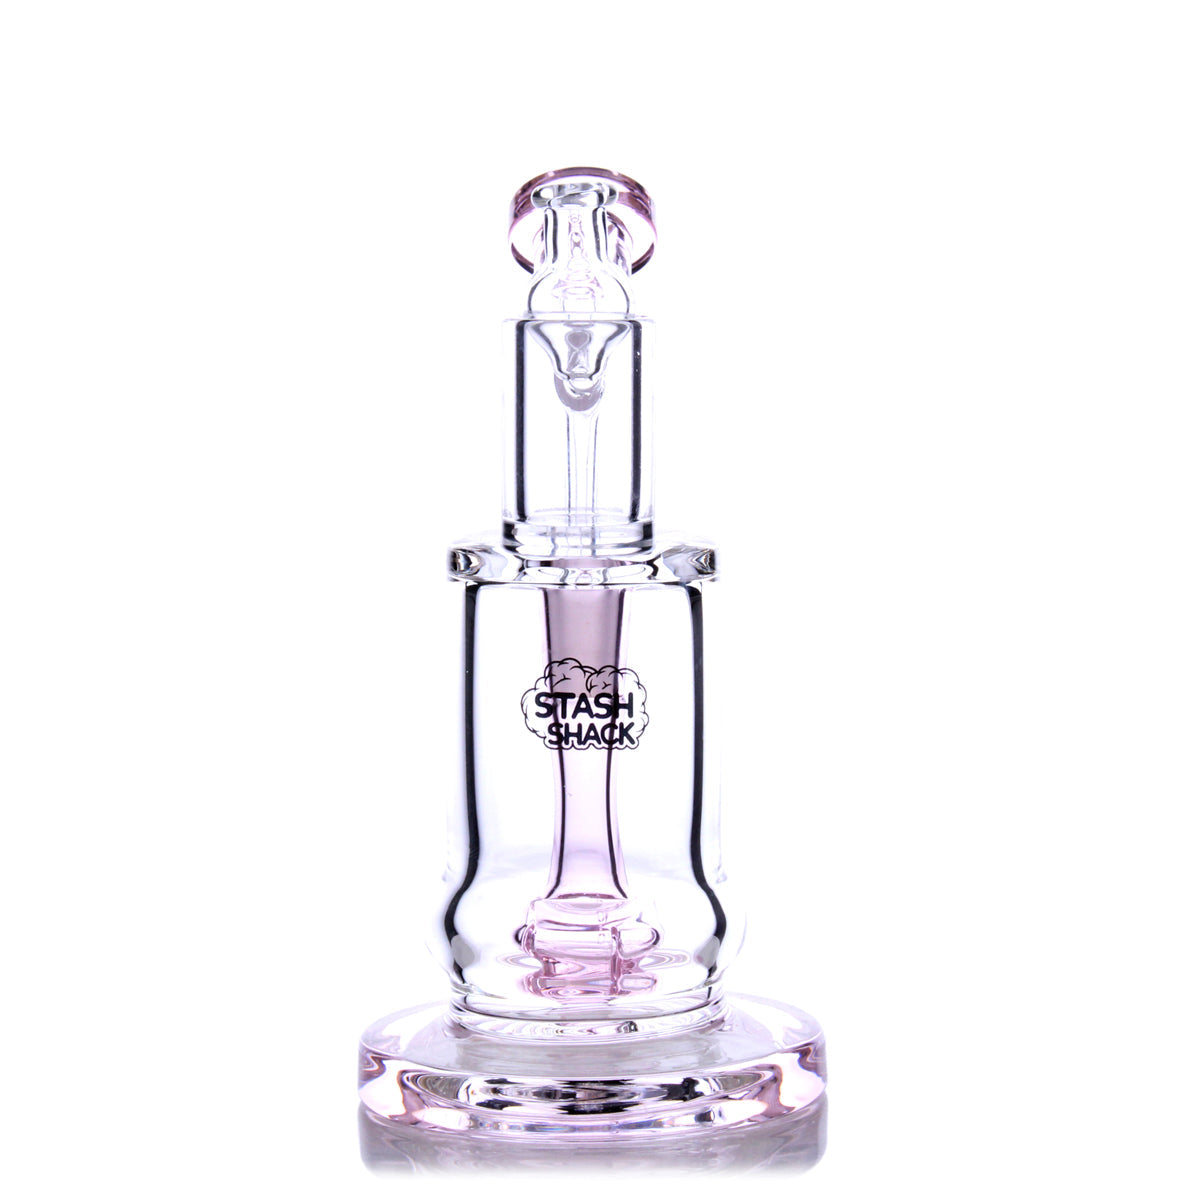 HydroBarrel Mini Rig by The Stash Shack, 5" compact banger hanger dab rig with showerhead percolator, front view